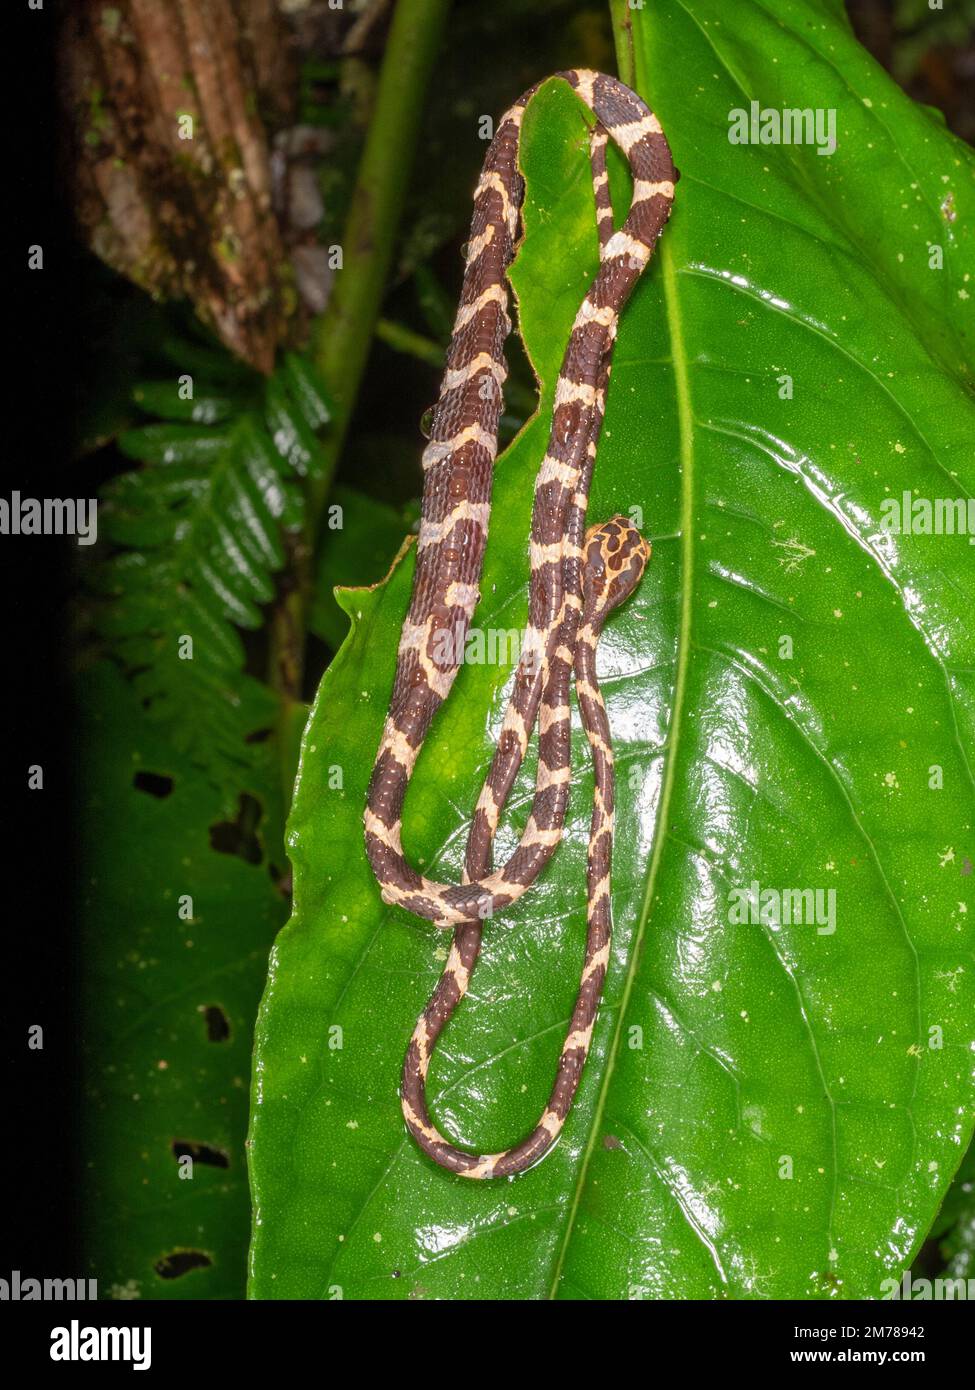 Blunt-headed tree snake (Imantodes cenchoa), resting on a rainforest leaf with distended abdomen after a meal, Orellana province, Ecuador Stock Photo